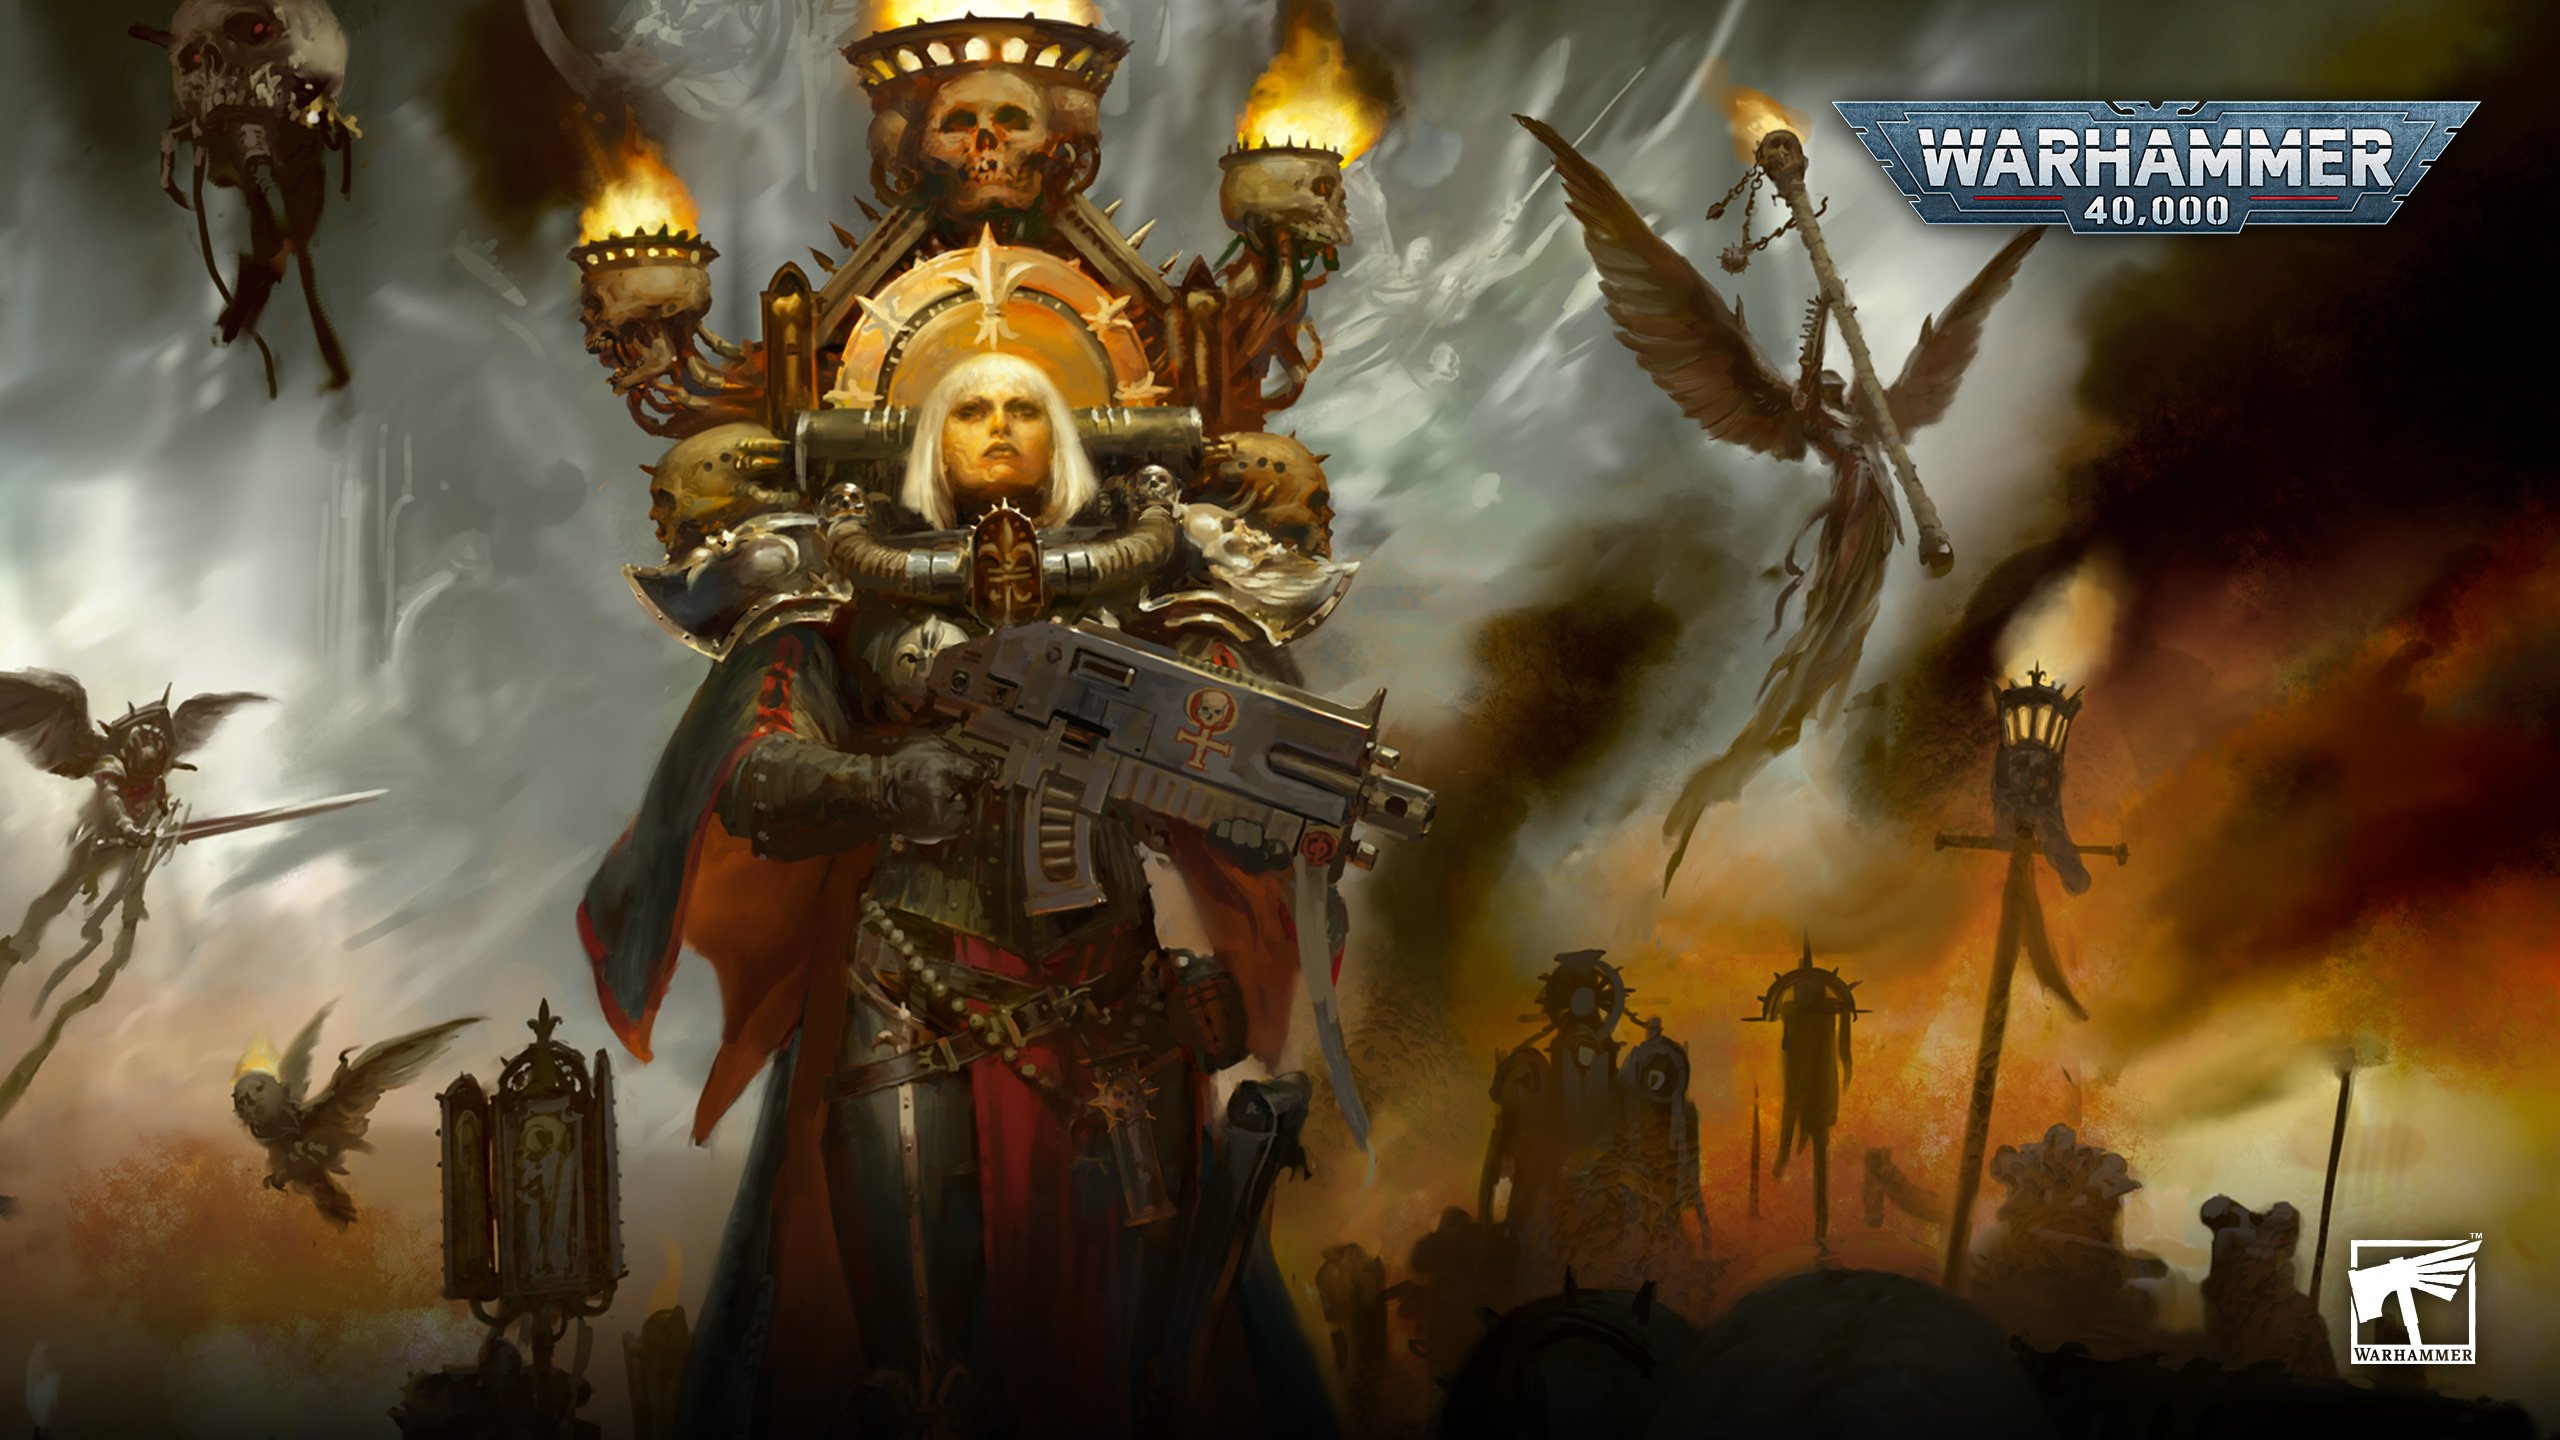 Best Warhammer 40K Wallpapers 69 images